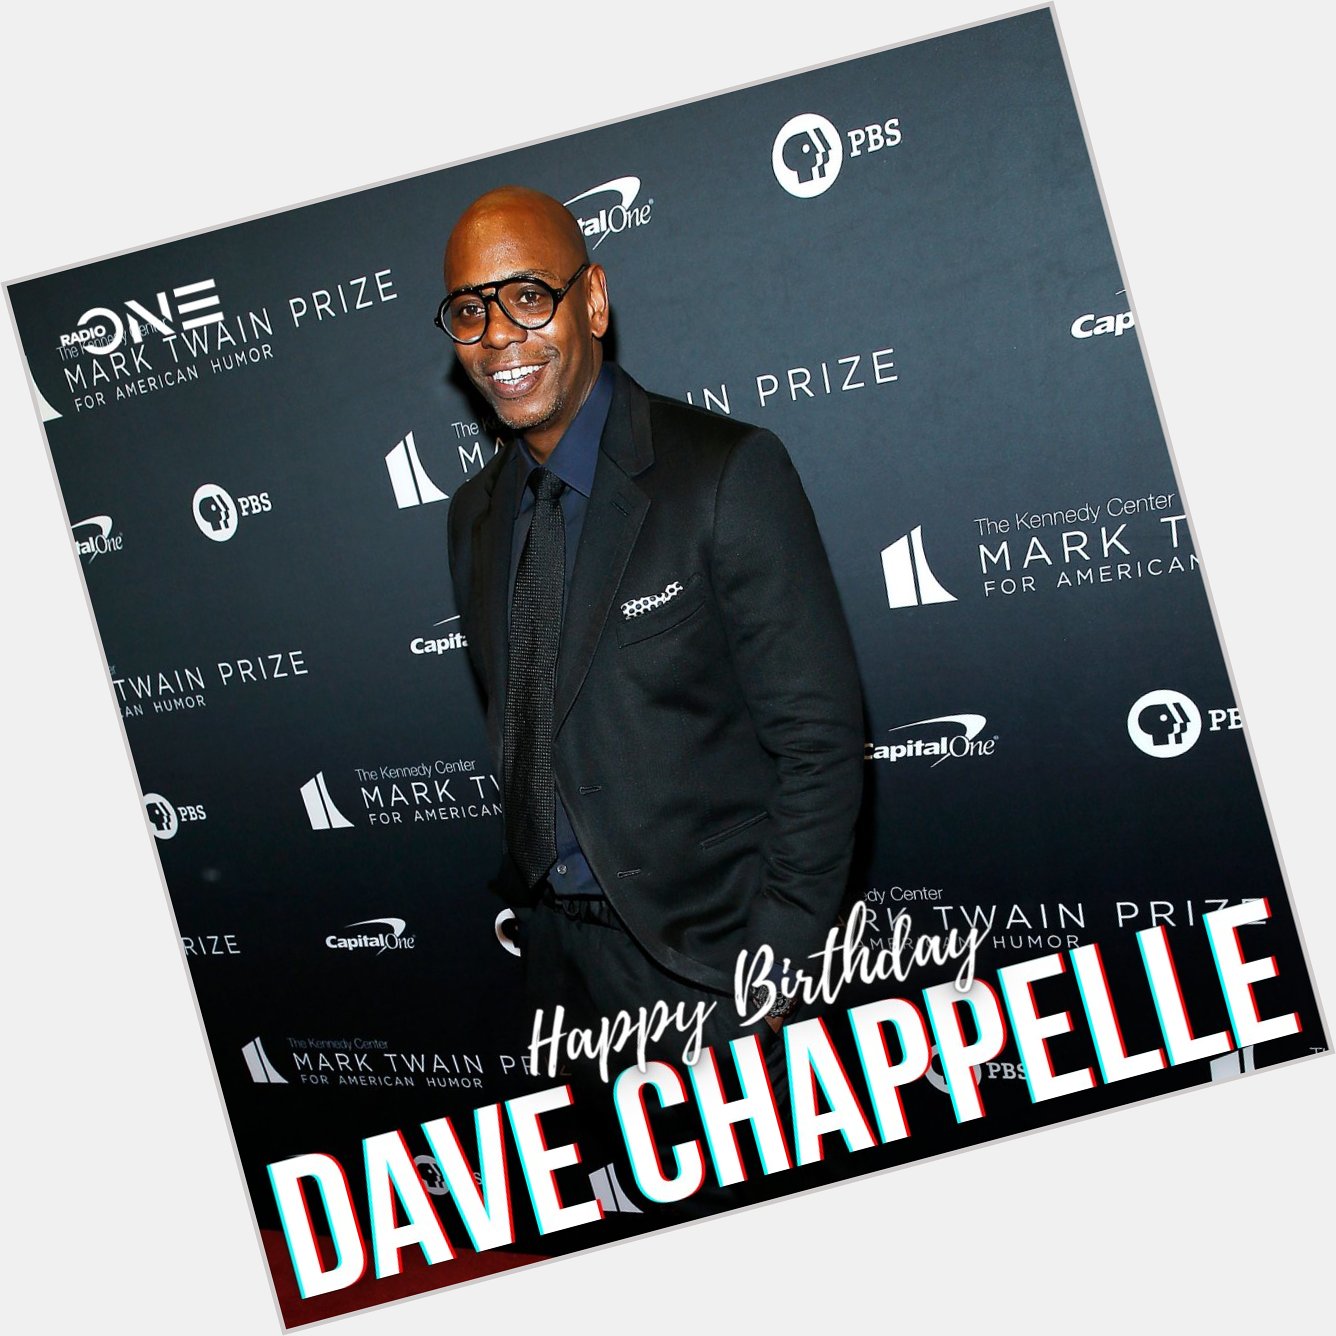 Happy birthday to a comedy Dave Chappelle!  